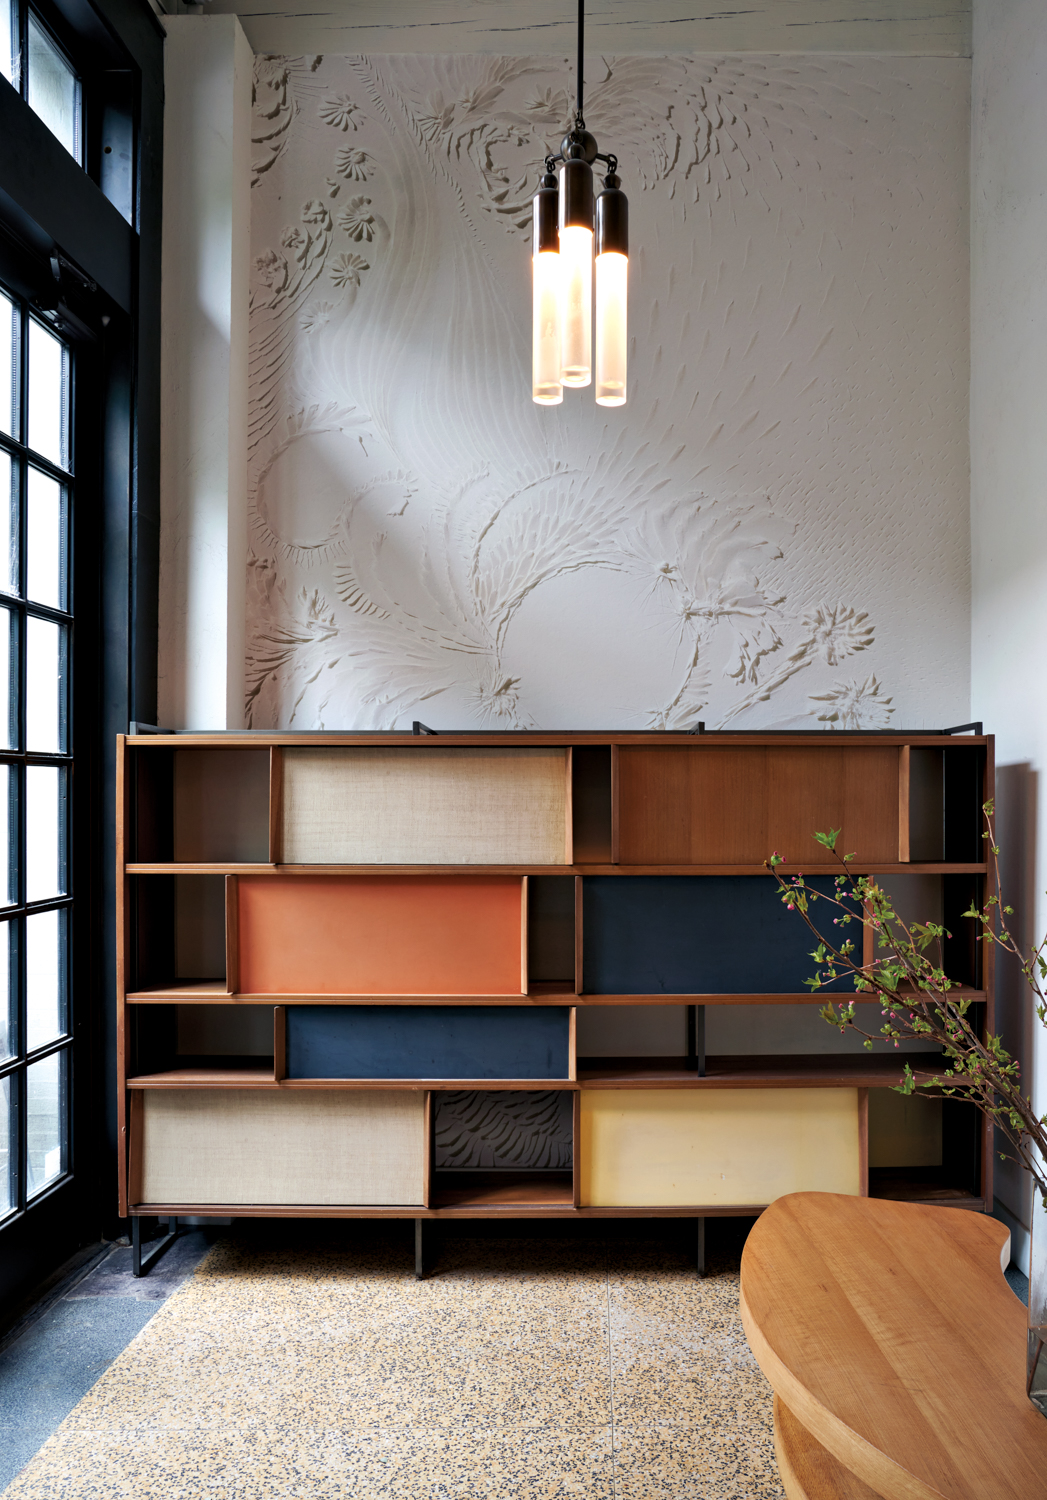 Midcentury modern-style console against white-plastered walls with a light fixture handing at center